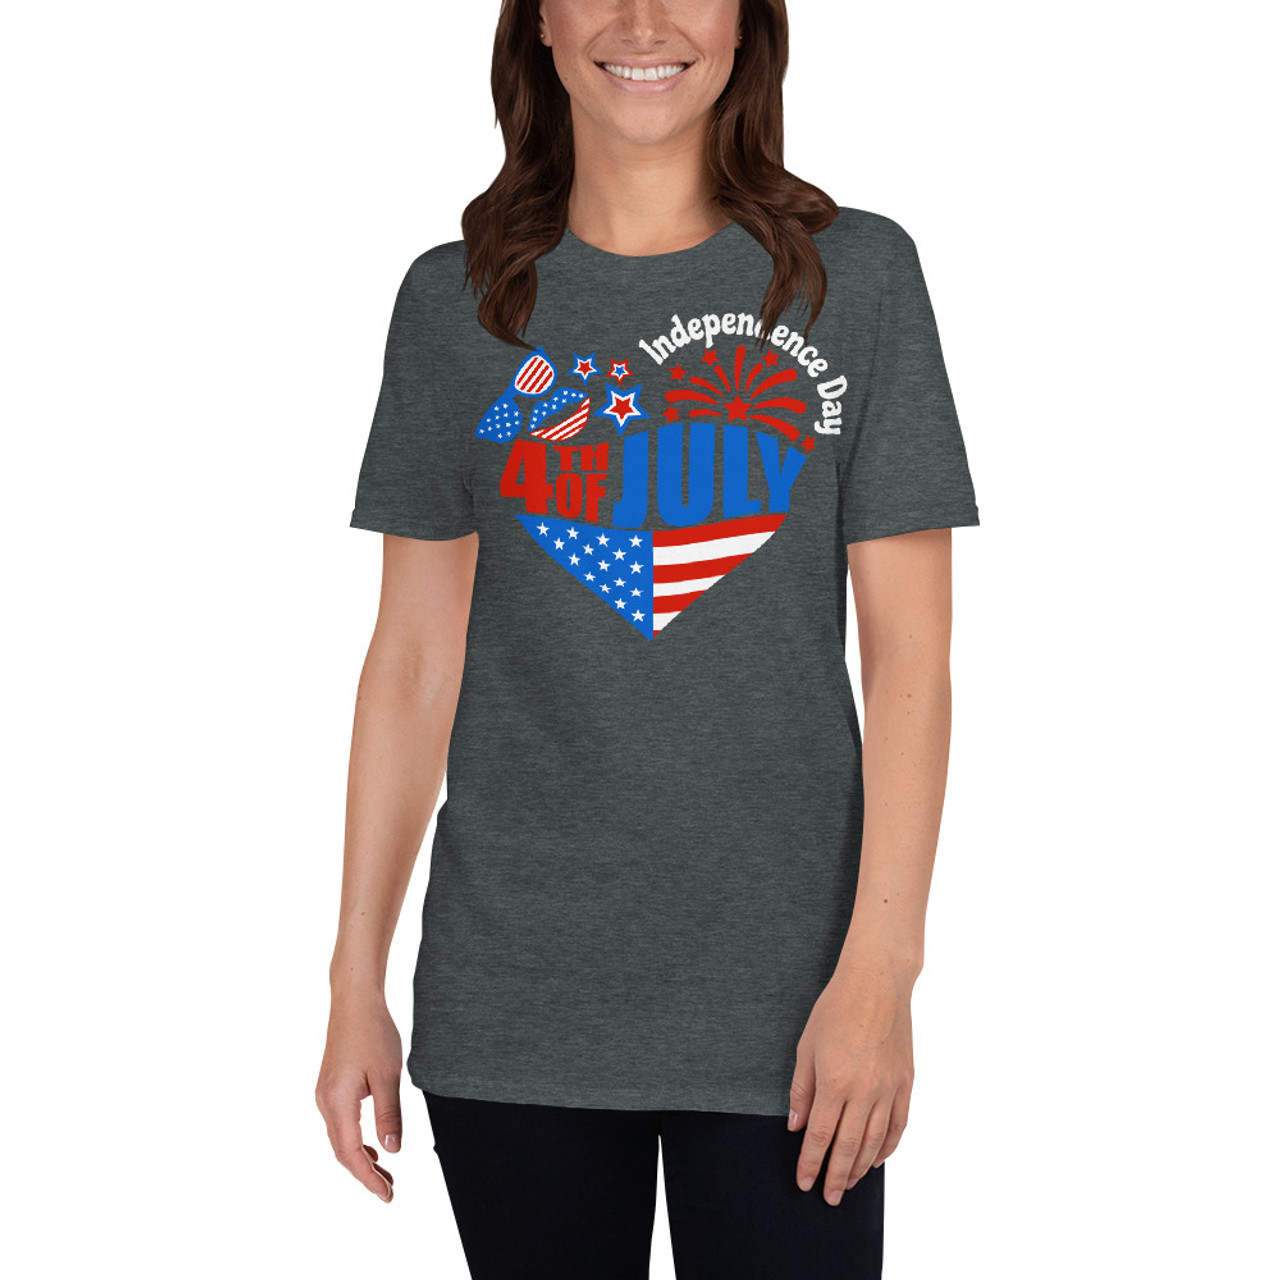 4th of July Heart Short-Sleeve Unisex T-Shirt - Meach's Military ...